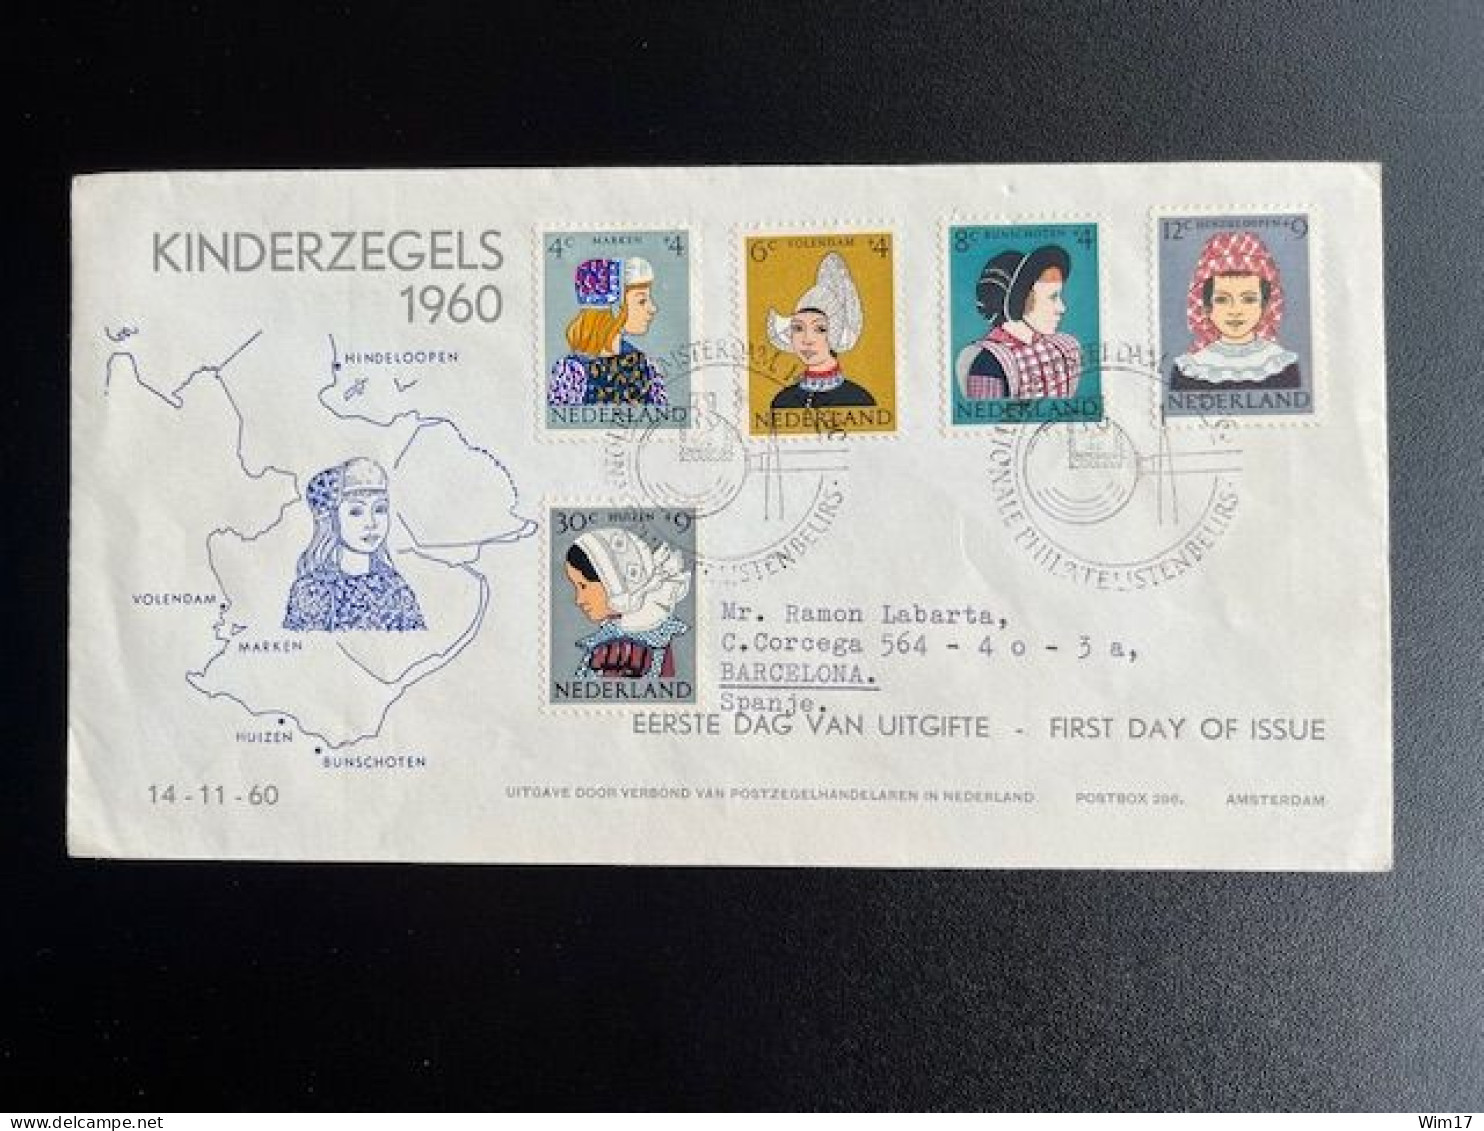 NETHERLANDS 1960 CIRCULATED FDC COSTUMES SEND TO BARCELONA 14-11-1960 NEDERLAND E46 - FDC